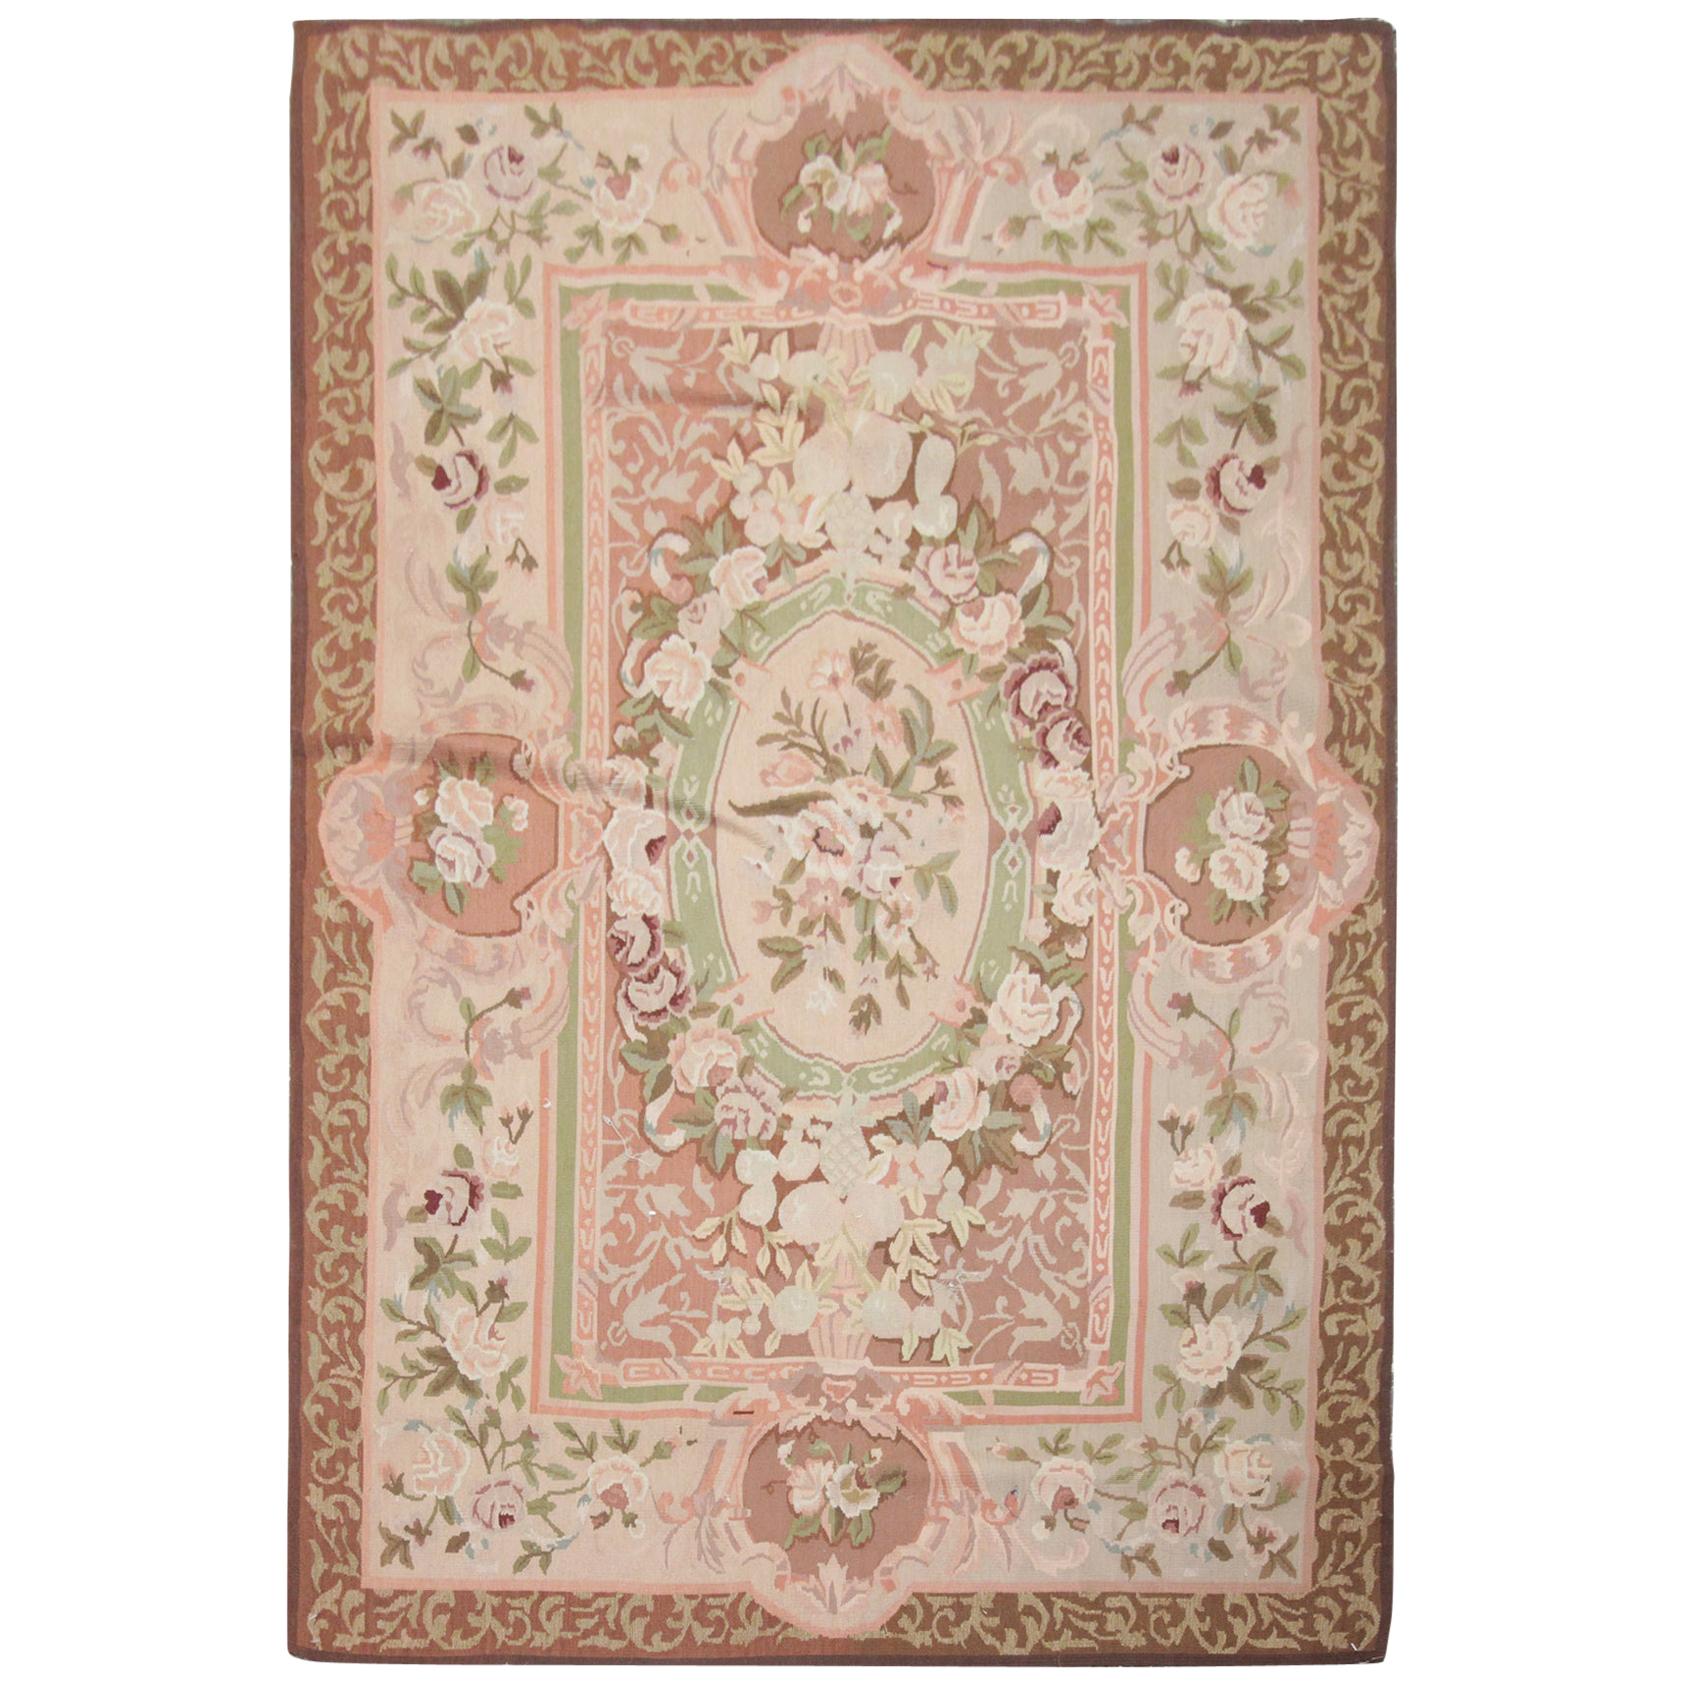 Vintage Aubusson Style Rug French Needlepoint Rug, Handwoven Tapestry Carpet